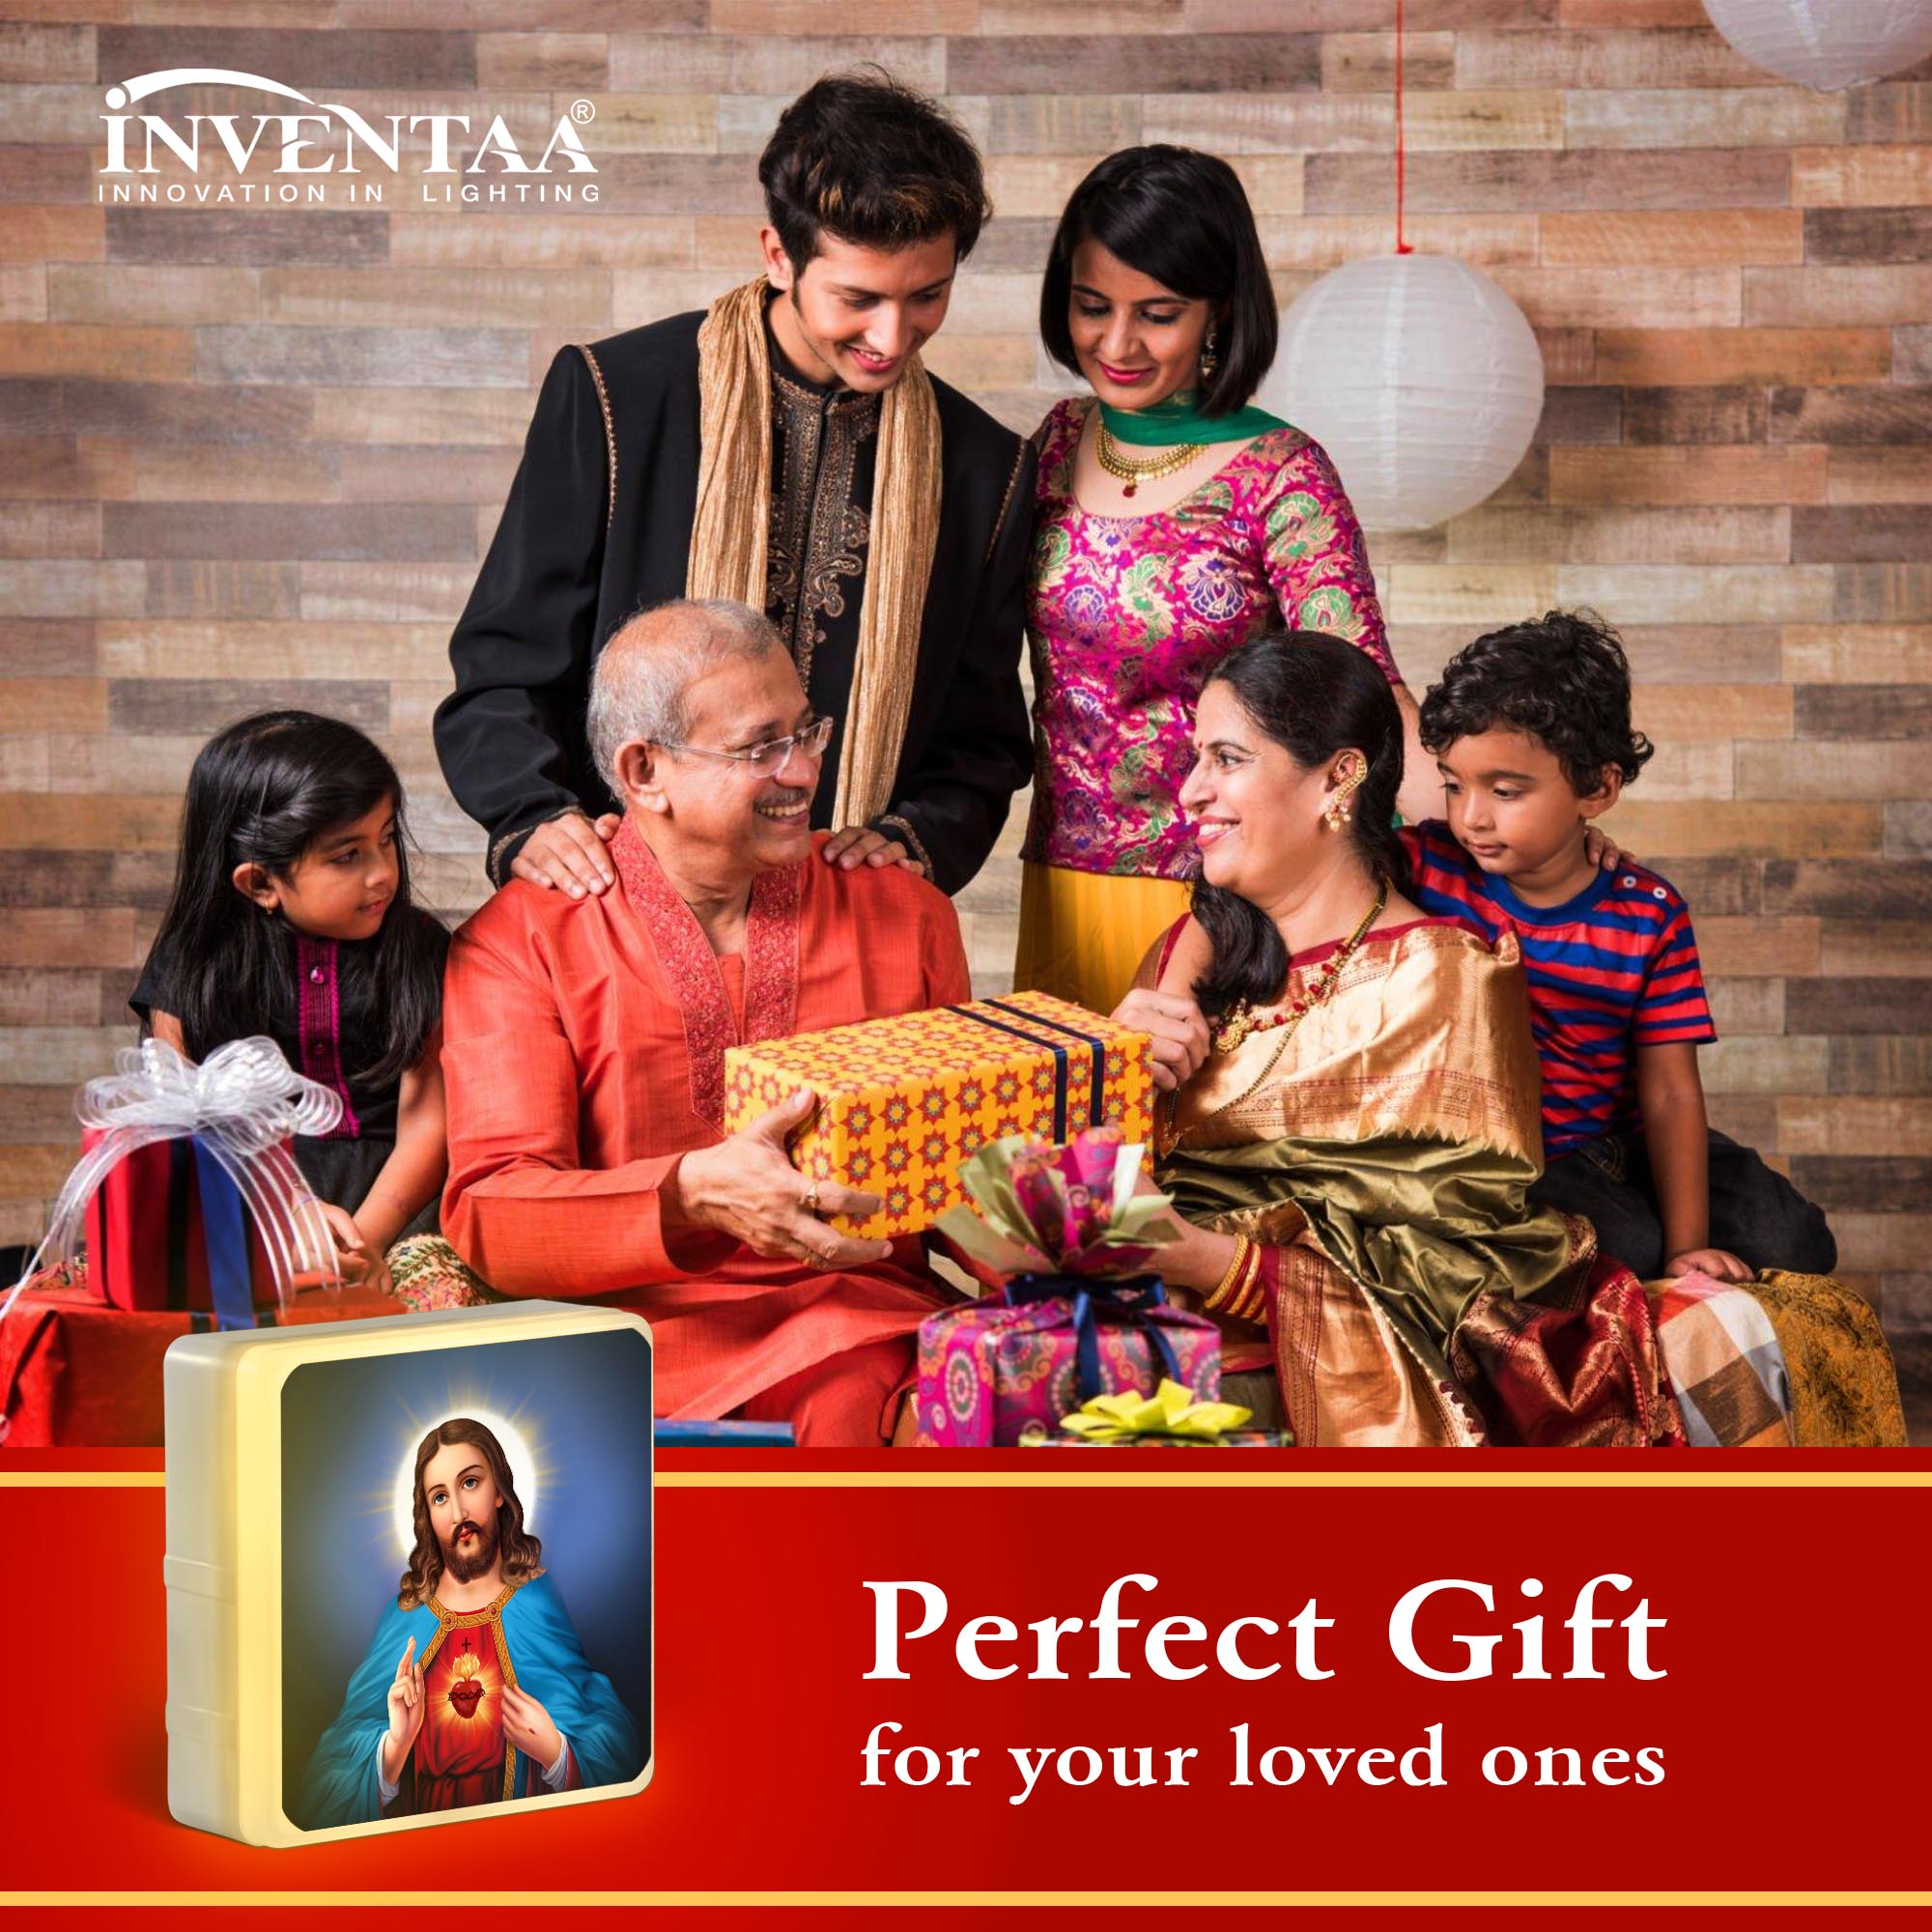 Gift Jesus Divine LED Wall Light To Your Loved Ones